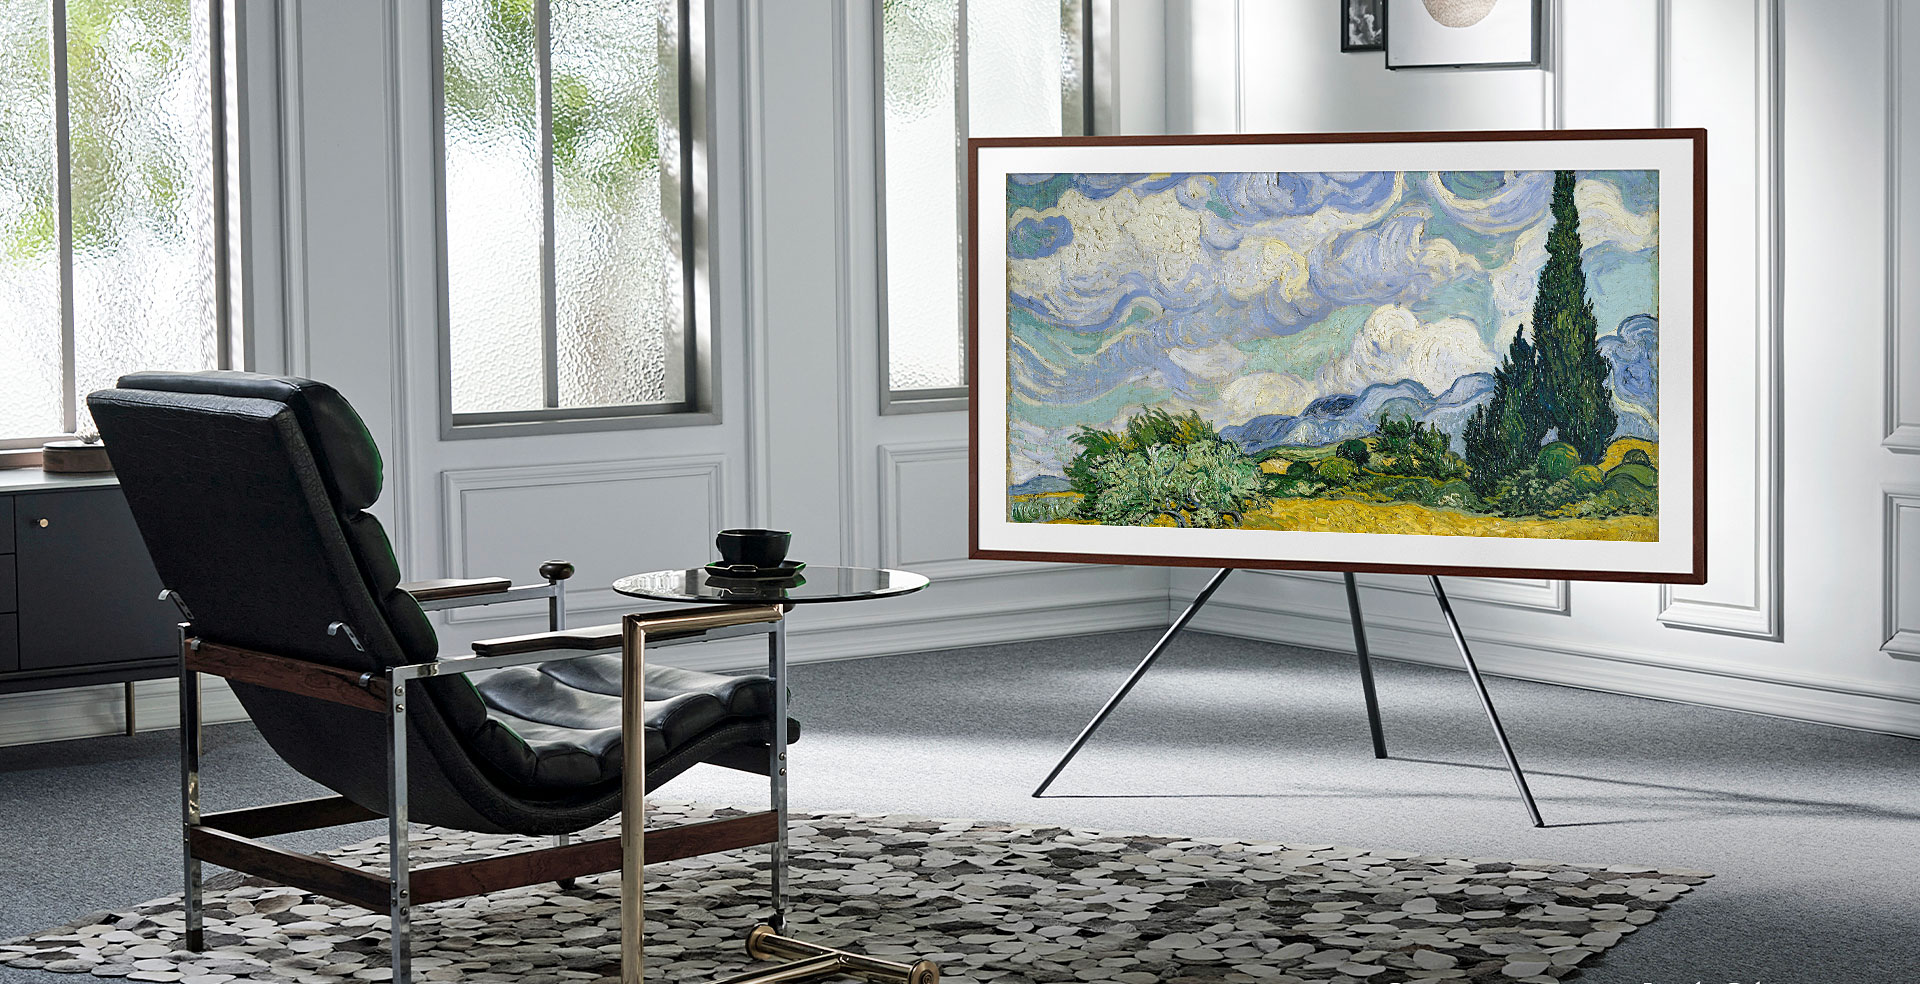 See Samsung's Latest Collab With The Metropolitan Museum of Art